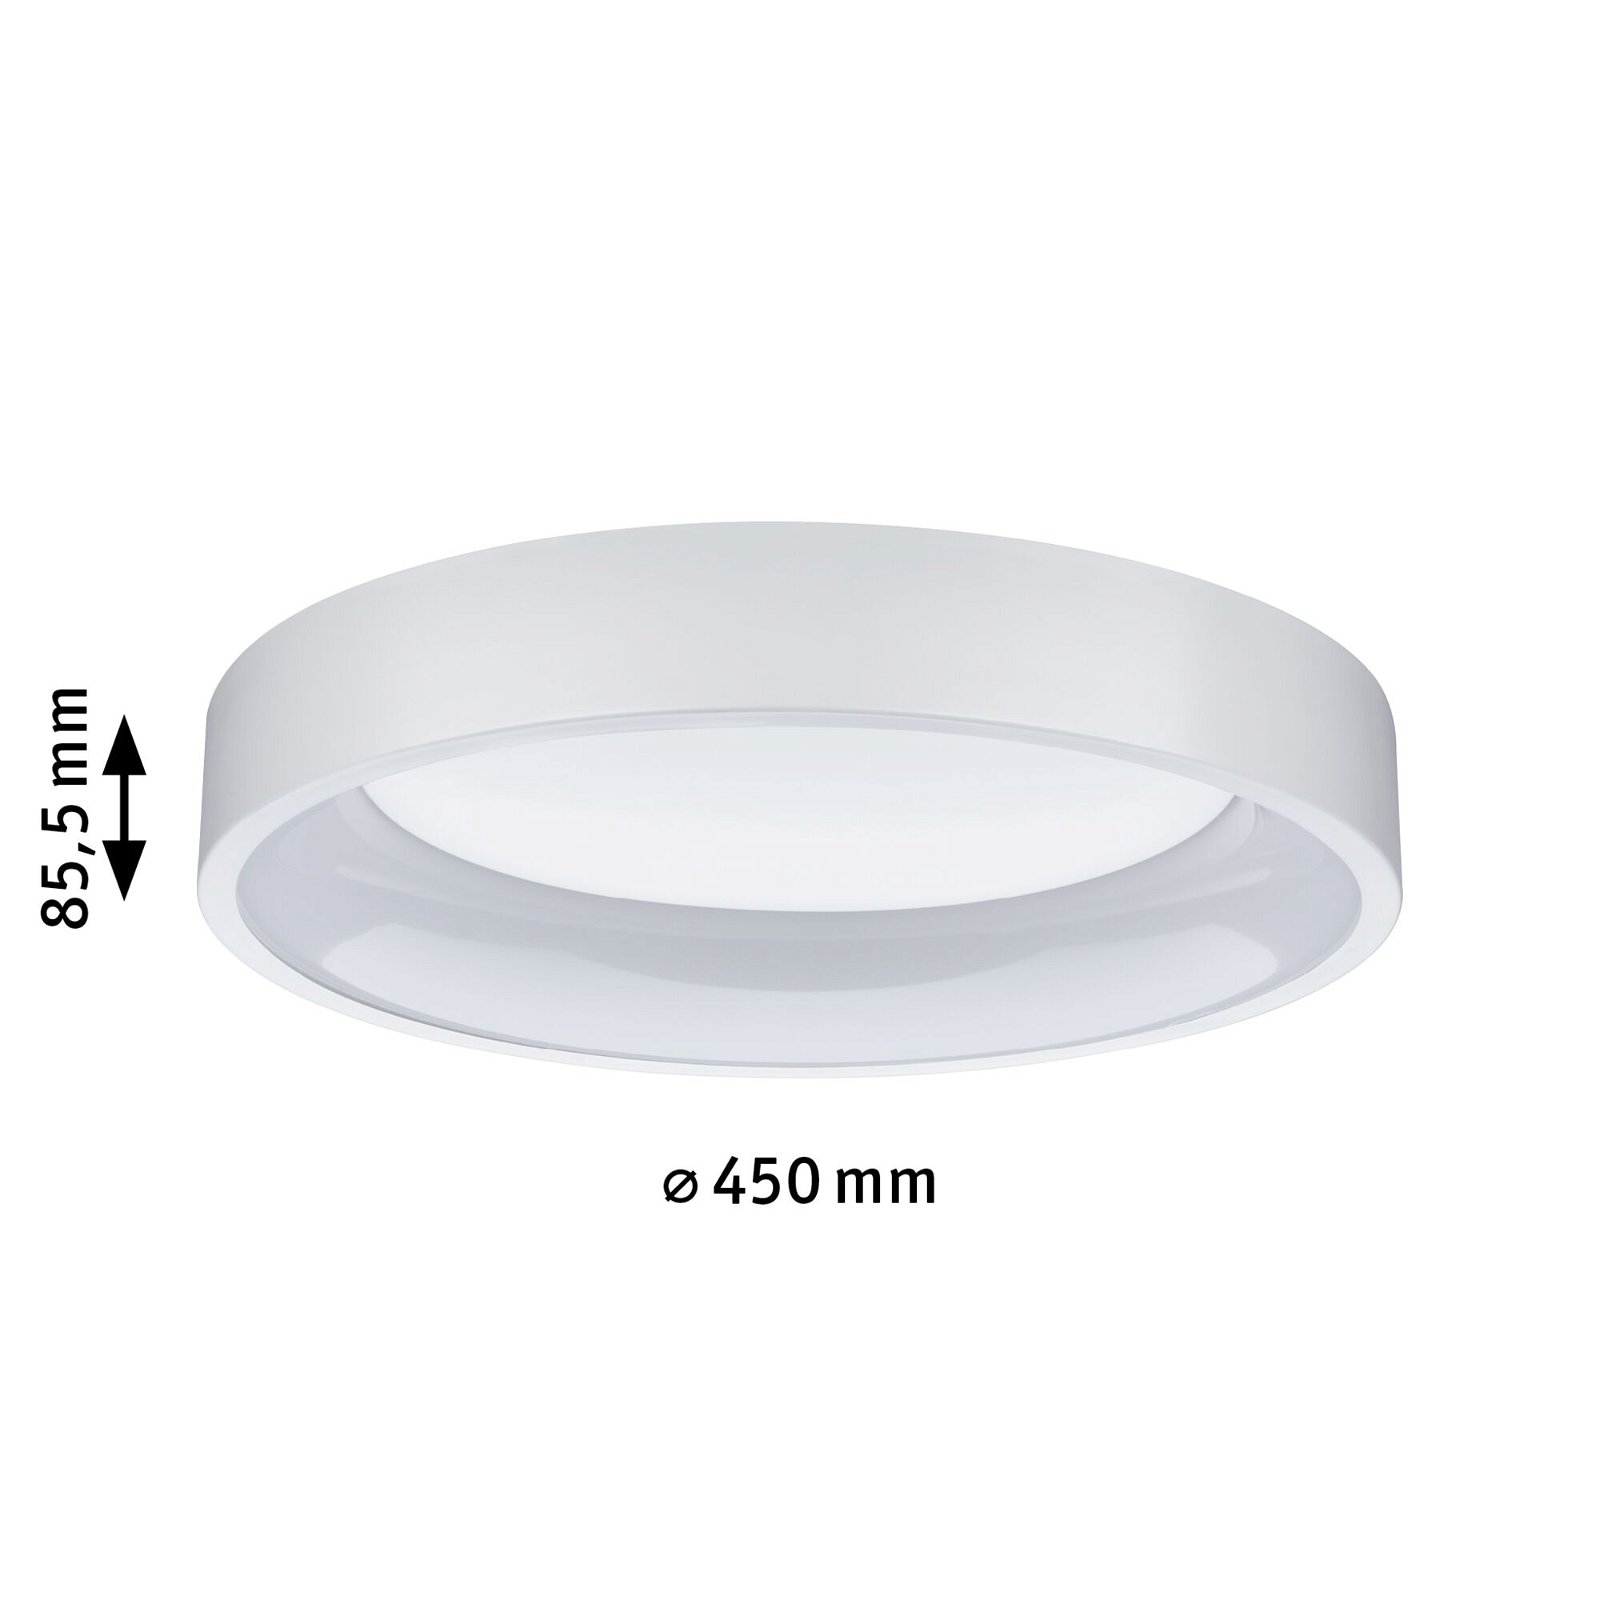 Ardora LED ceiling luminaire 23.5W white dimmable